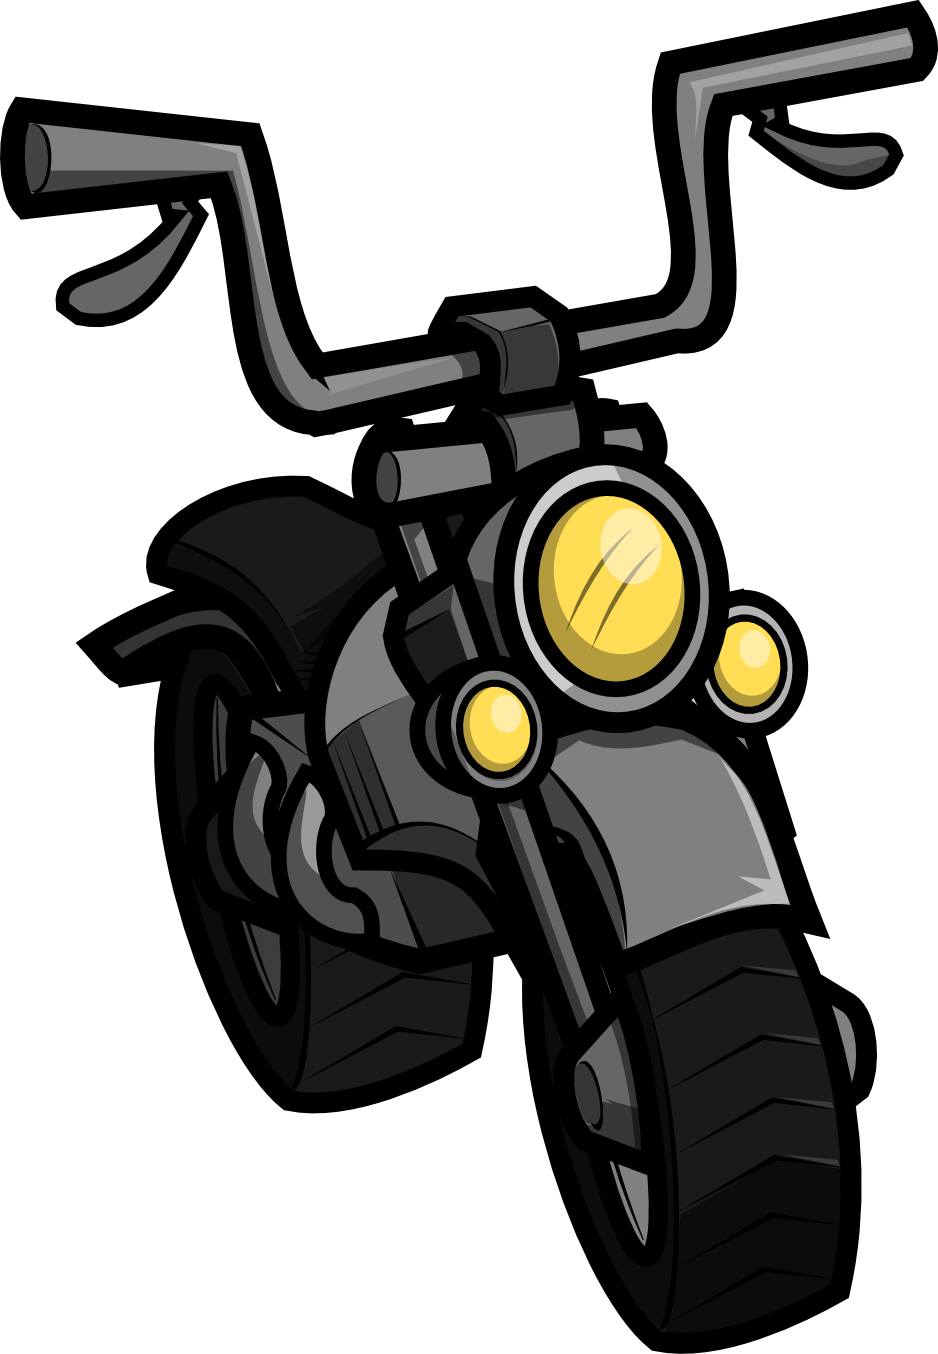 Motorcycle free to use cliparts 2